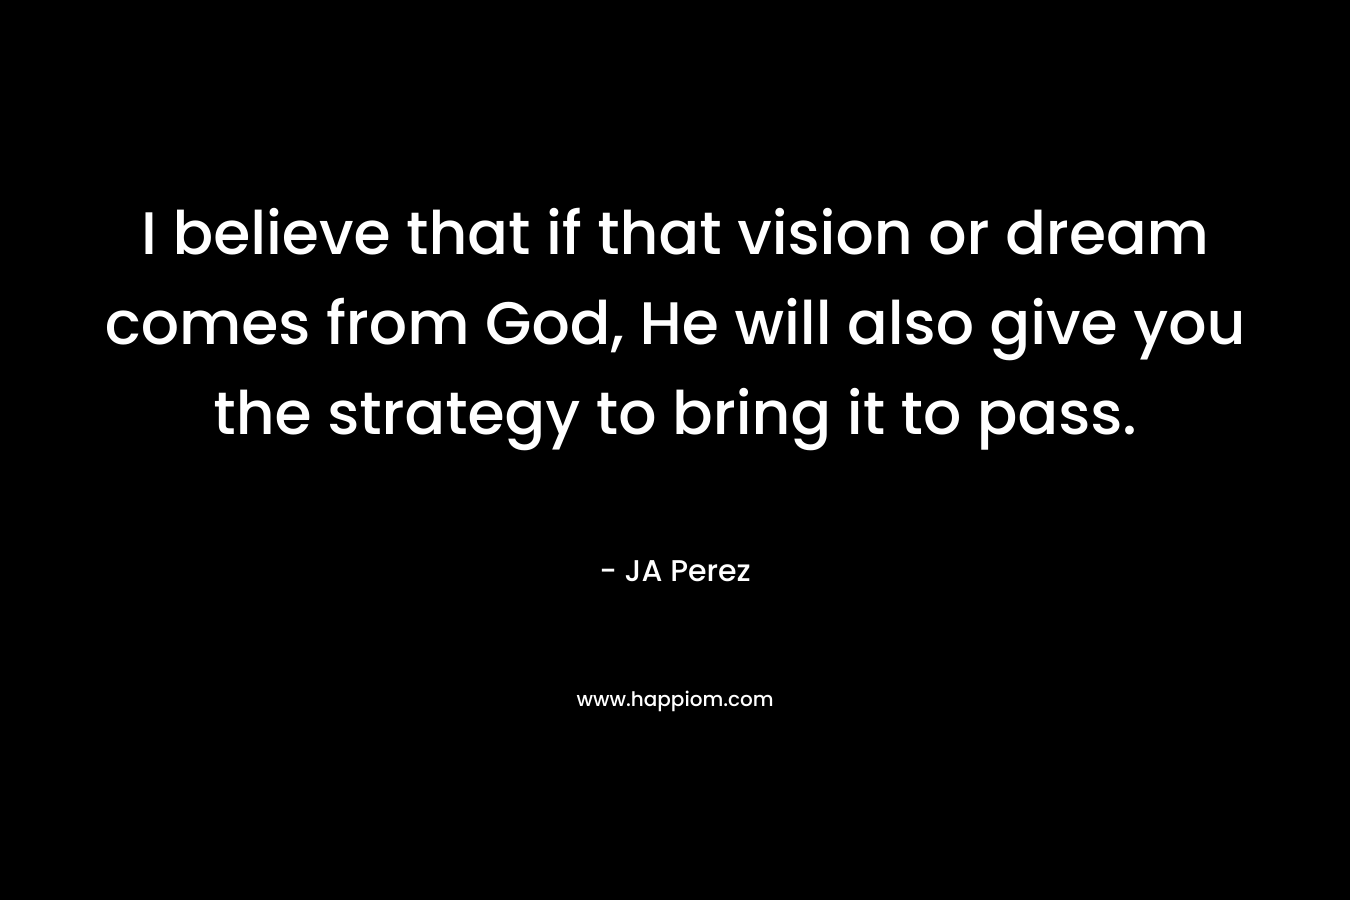 I believe that if that vision or dream comes from God, He will also give you the strategy to bring it to pass. – JA Perez